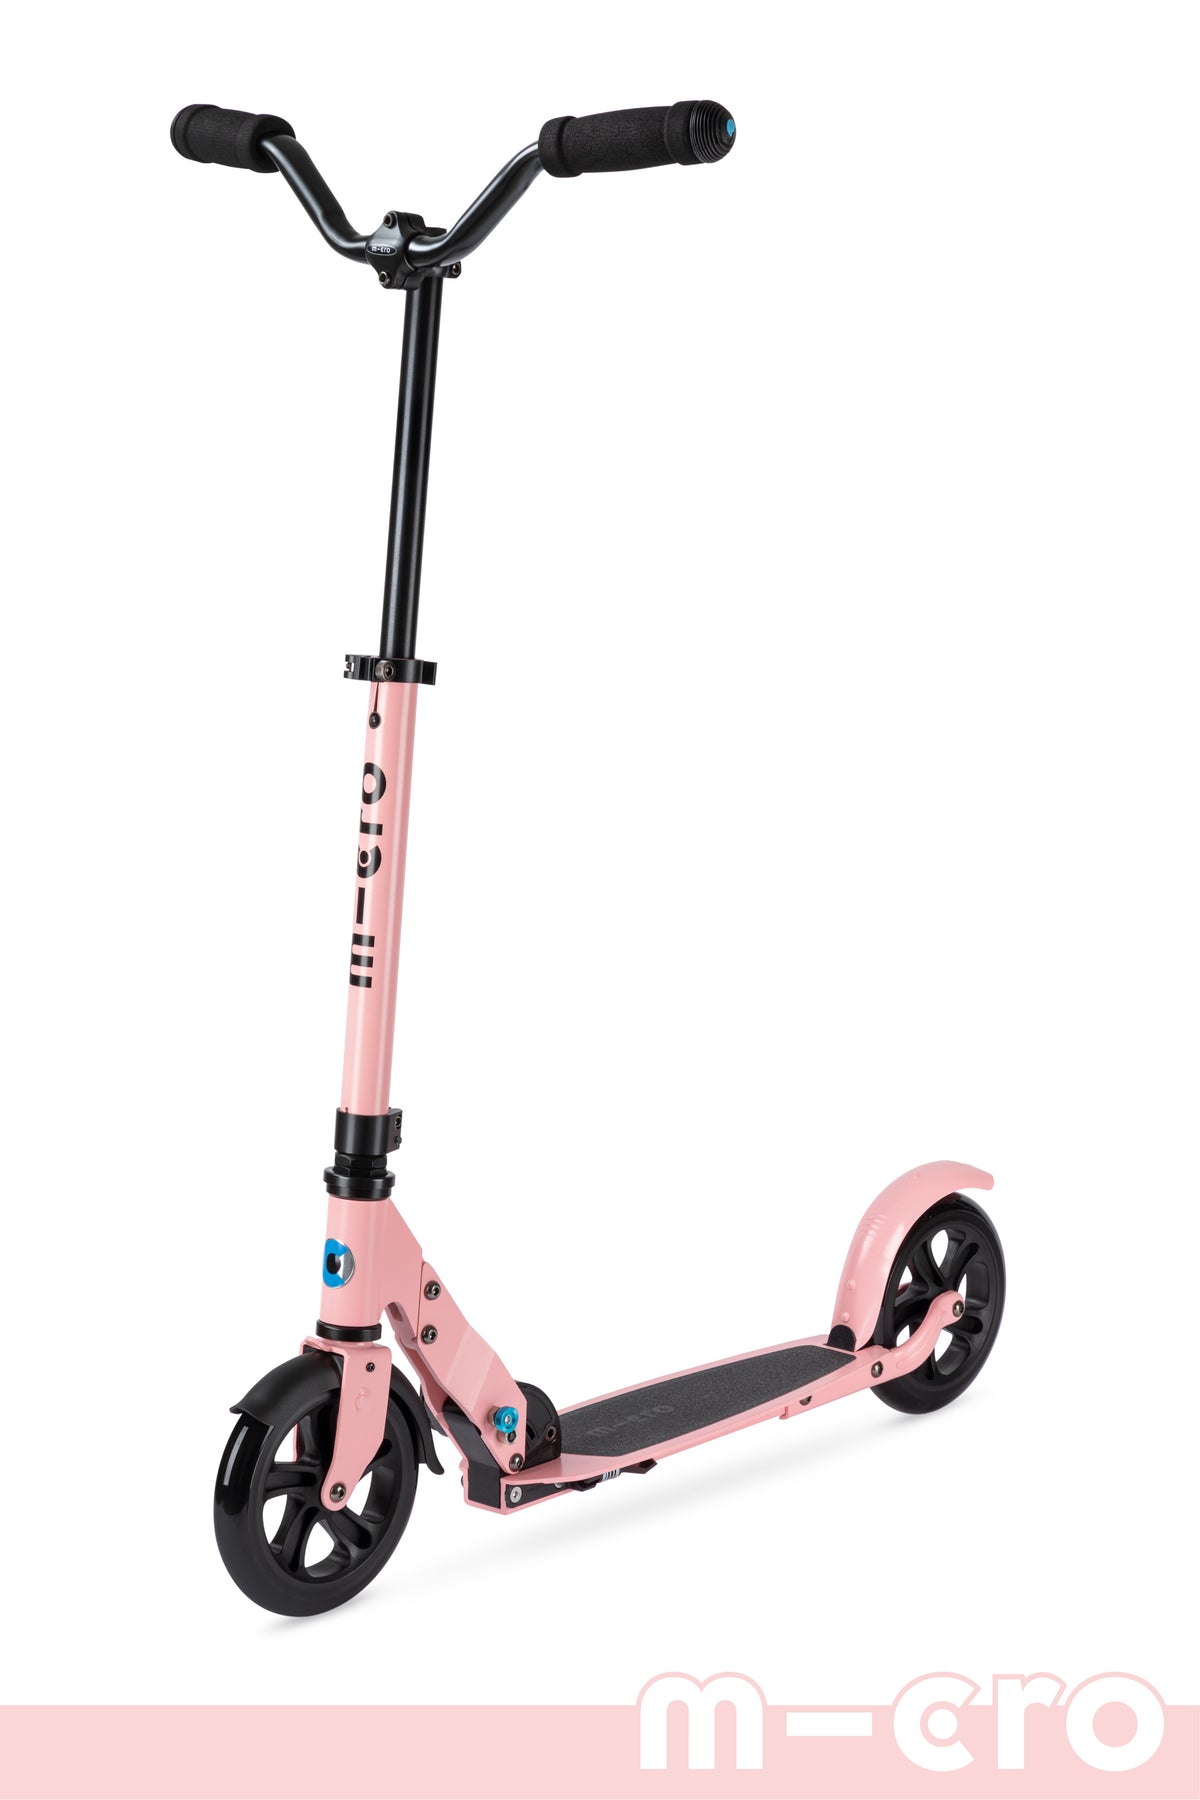 Best Quality Adult Kick Scooter? Micro Flex and Flex Air Scooter